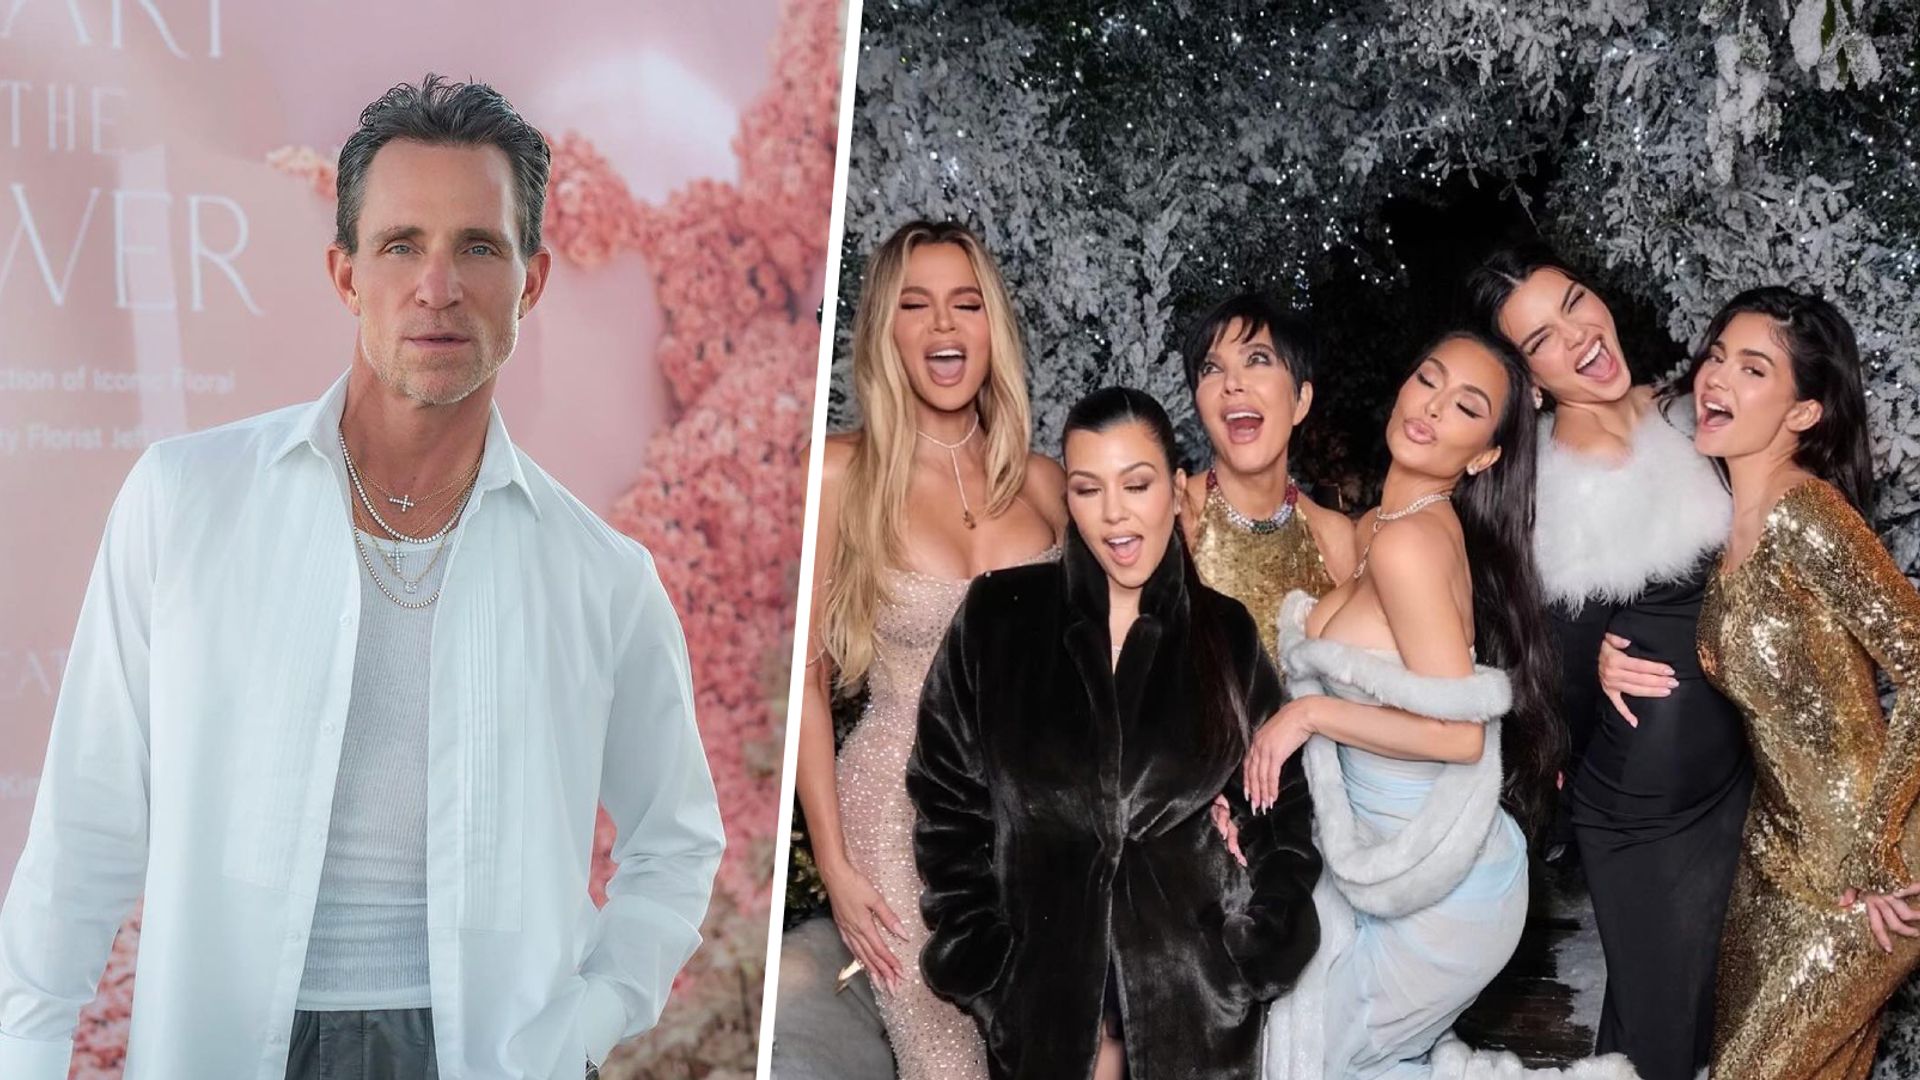 The Kardashians' florist reveals details of working with the famous family – 'they are trendsetters'